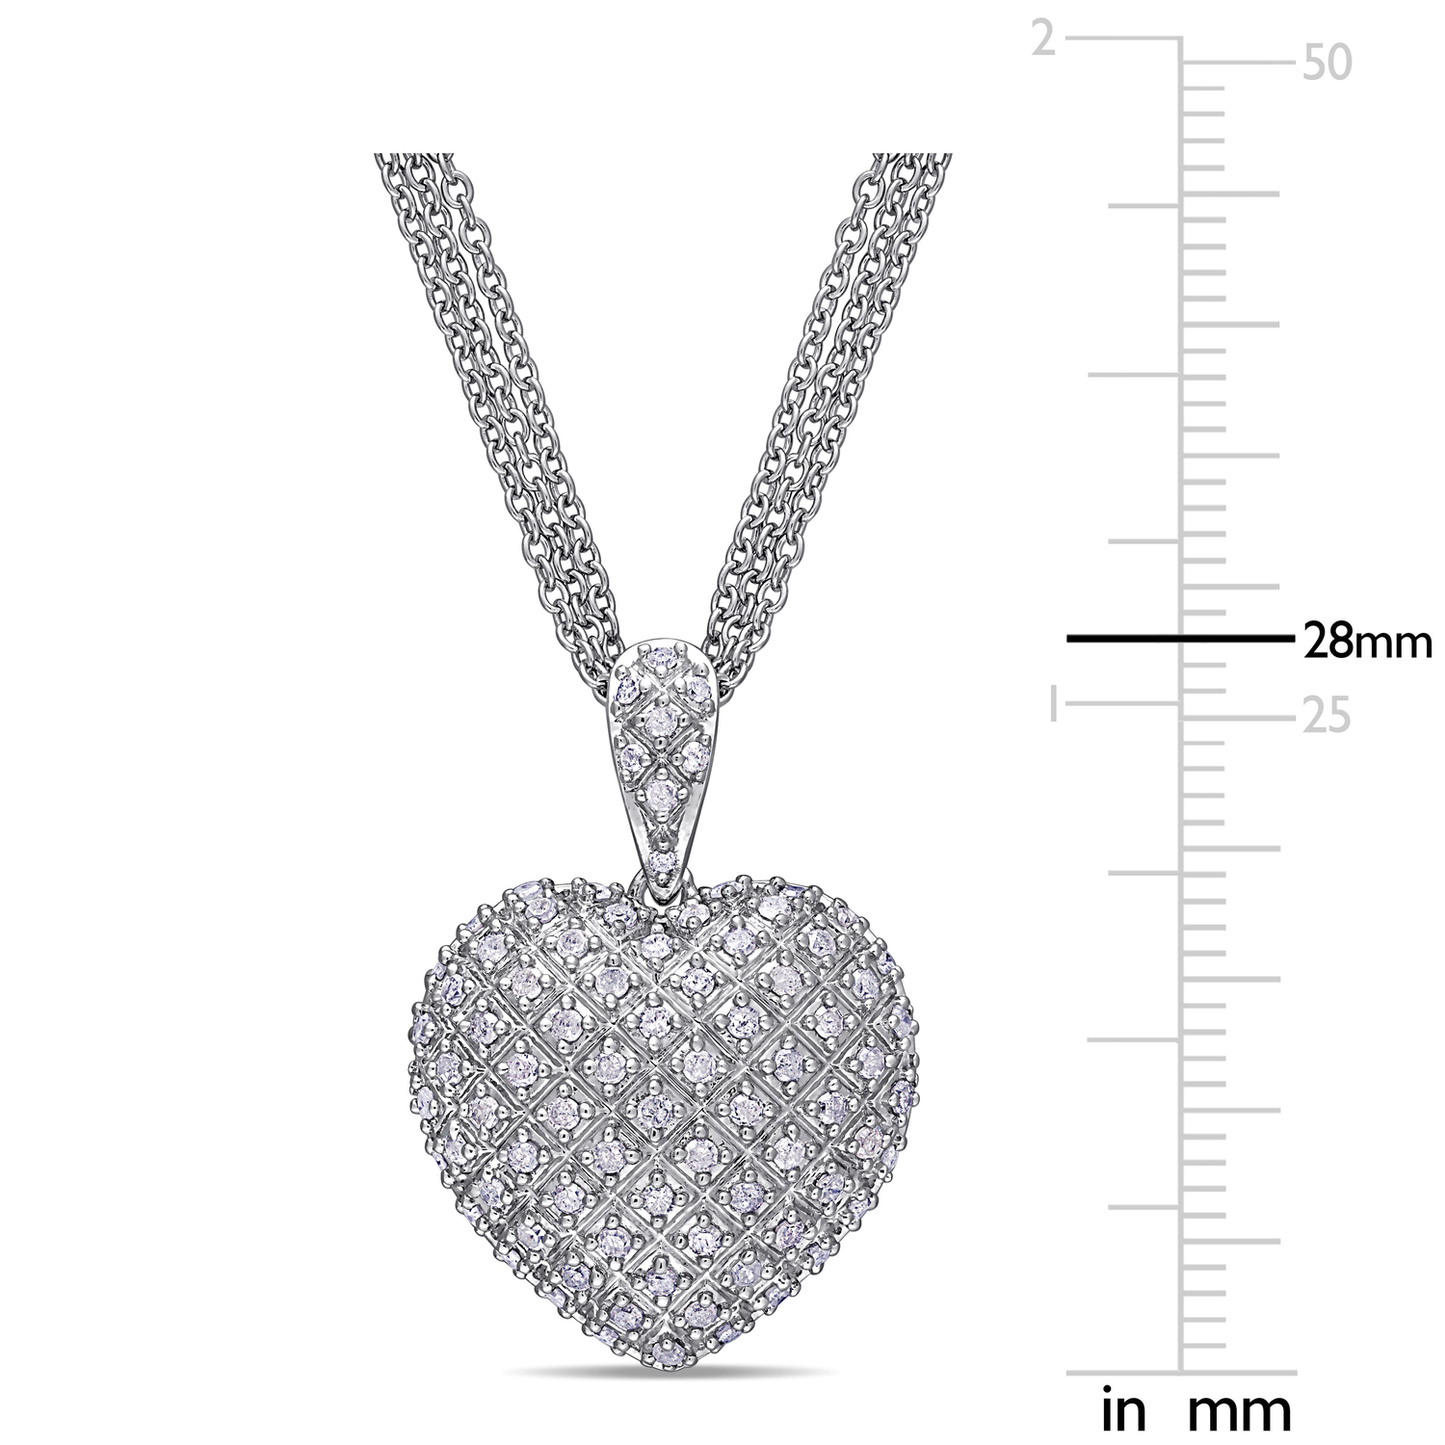 Diamond Heart Sterling Silver Chain Necklace